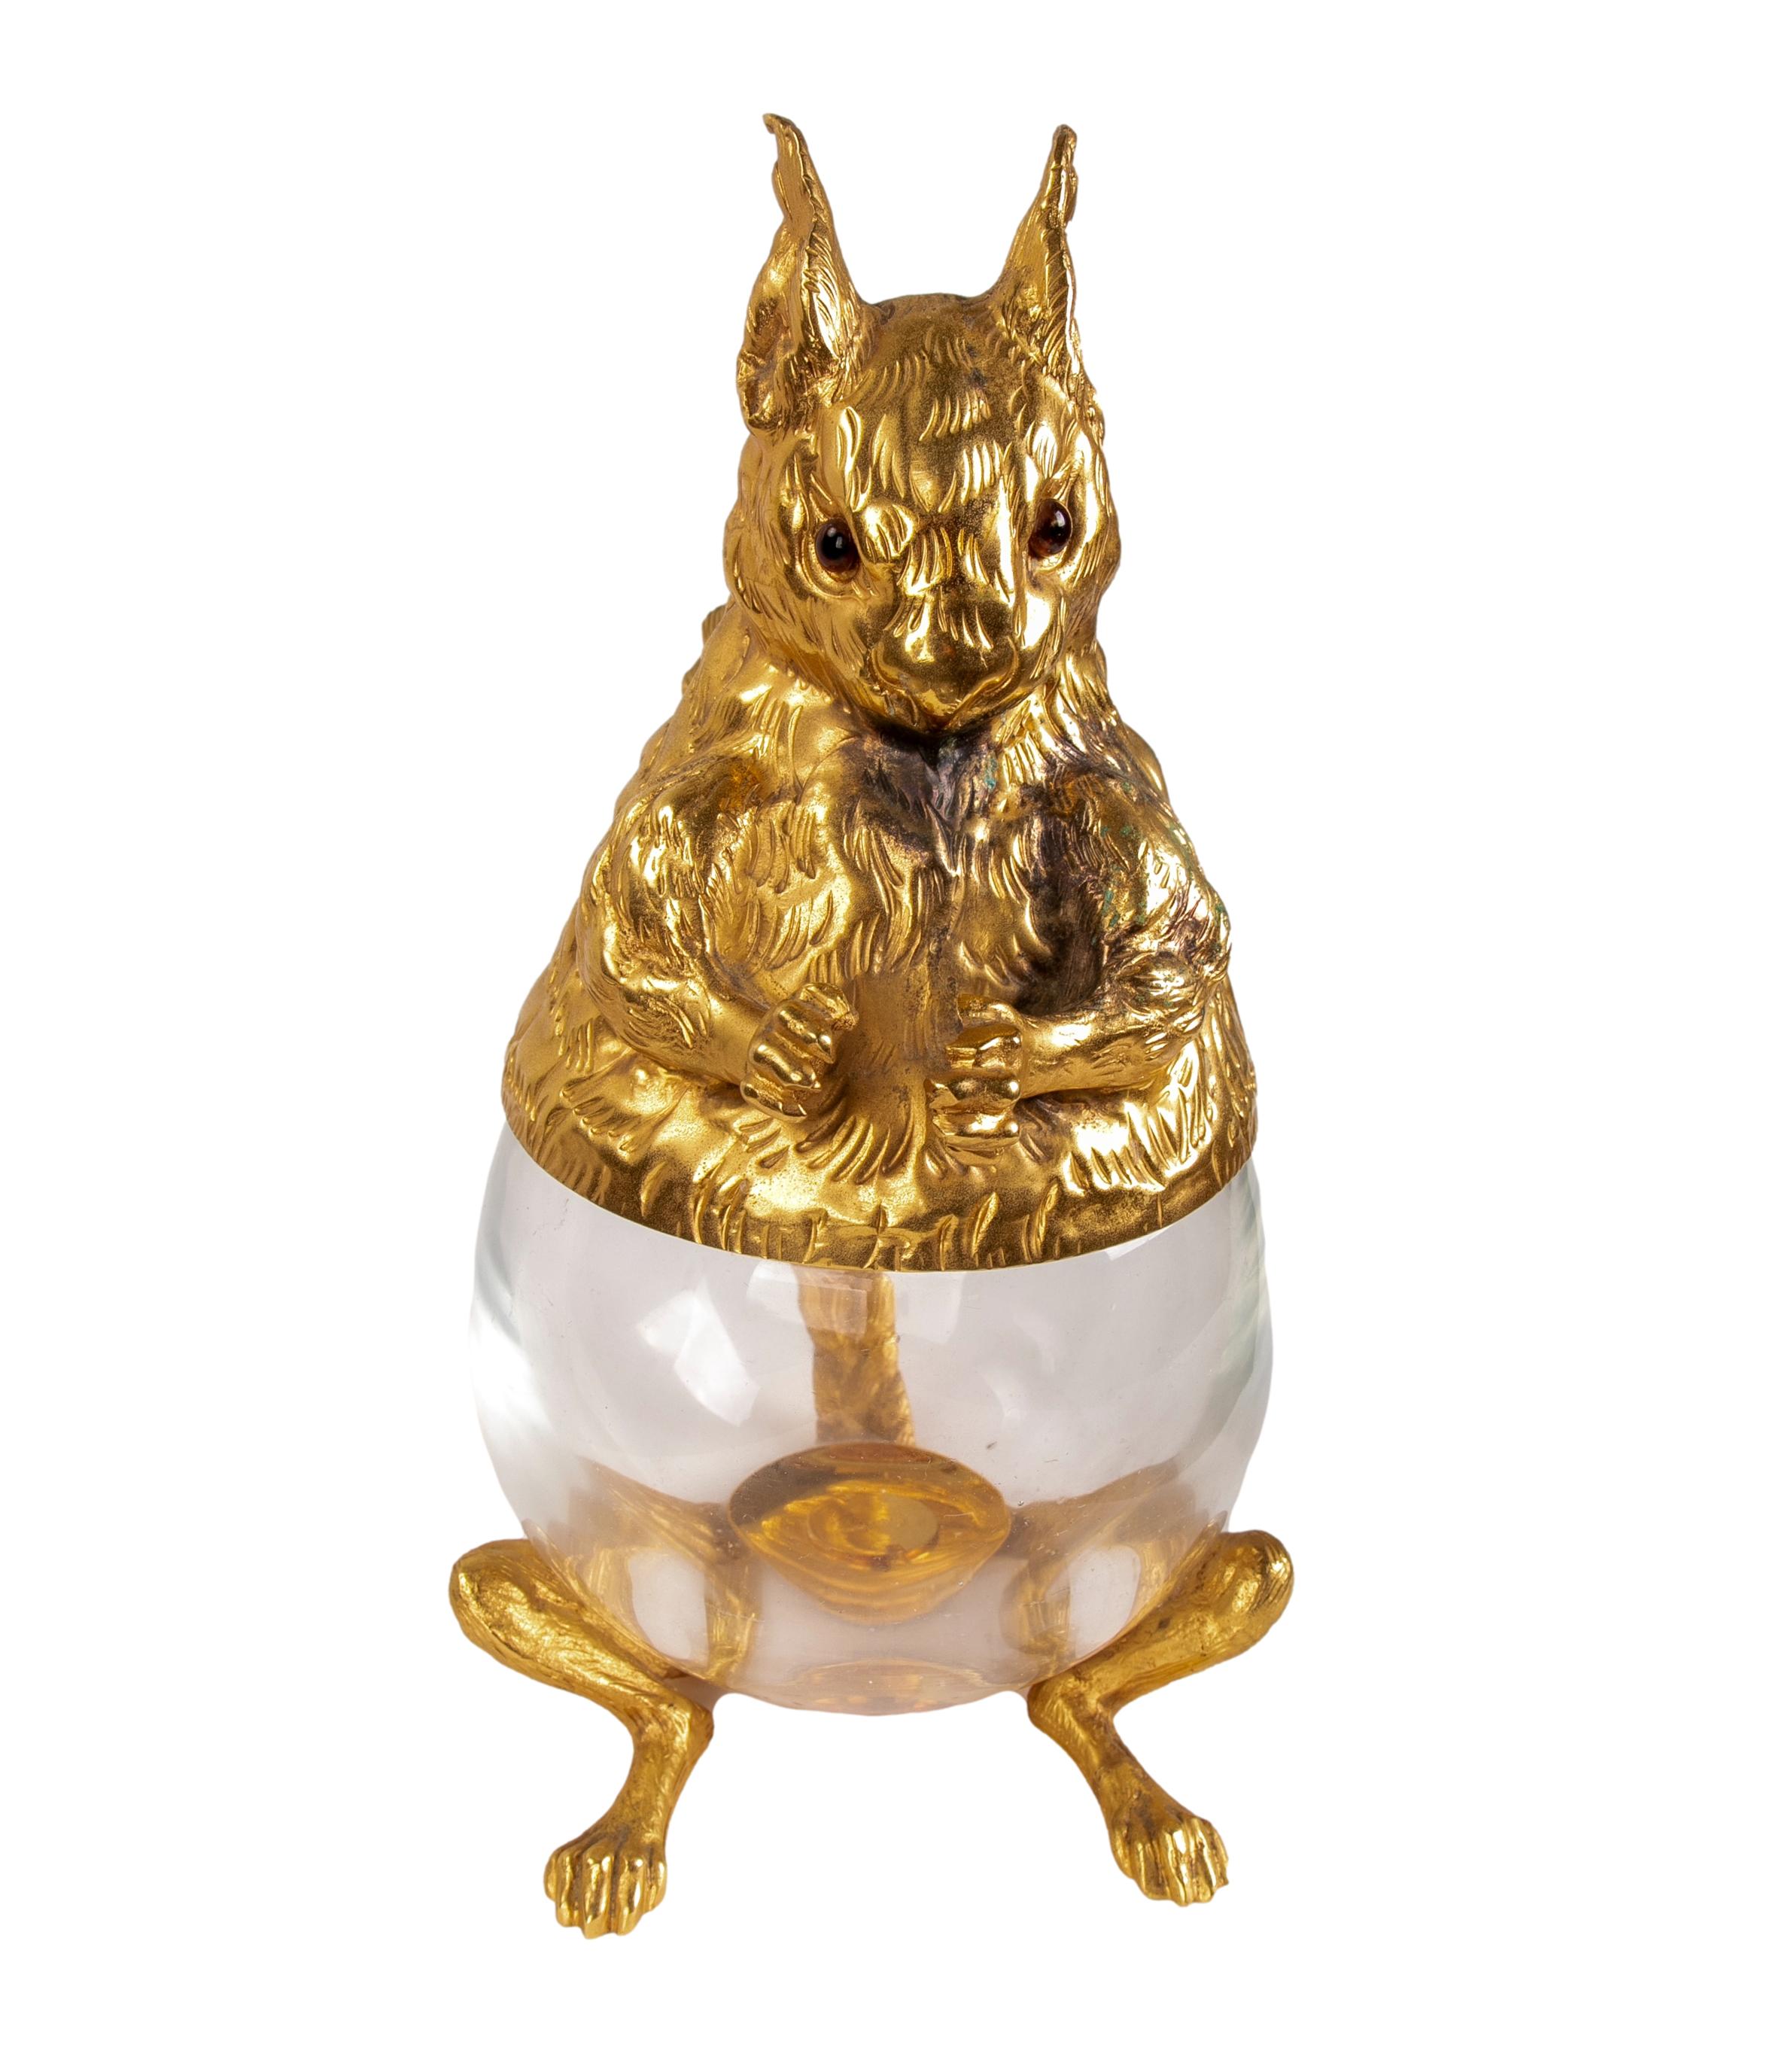 Italian Squirrel-shaped box in gilded metal signed on the inside. TTauy raviga.

